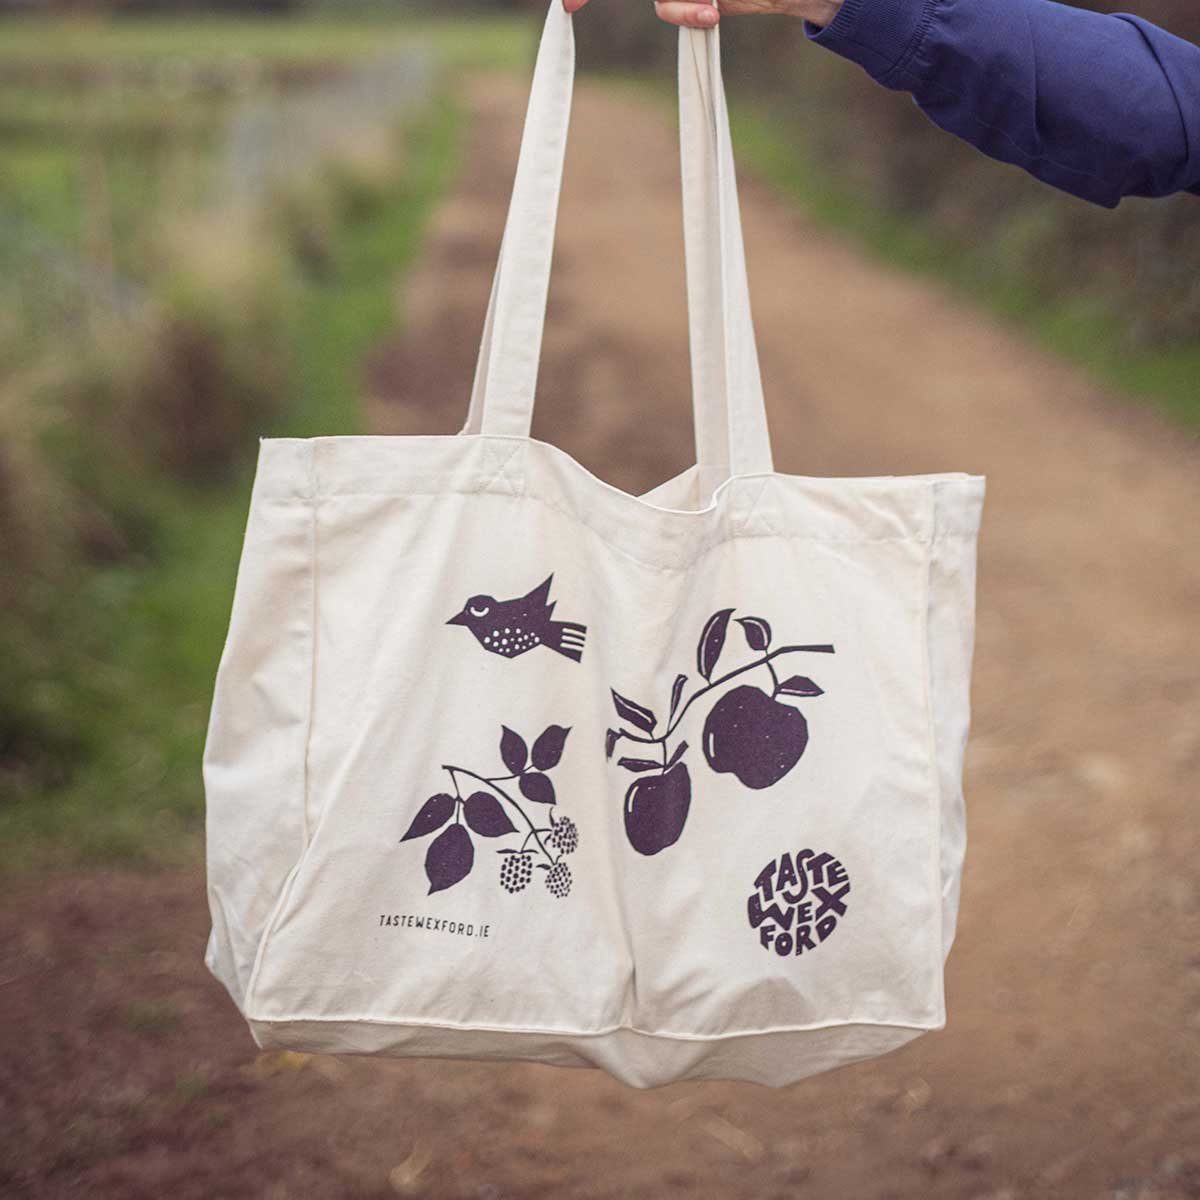 Bespoke illustrated organic cotton shopper bag 

Hand screen printed in Ireland using water-based inks, our bags are nice and big so you can use them for all sorts of trips, from shopping to swimming to foraging.

There are two designs to choose from